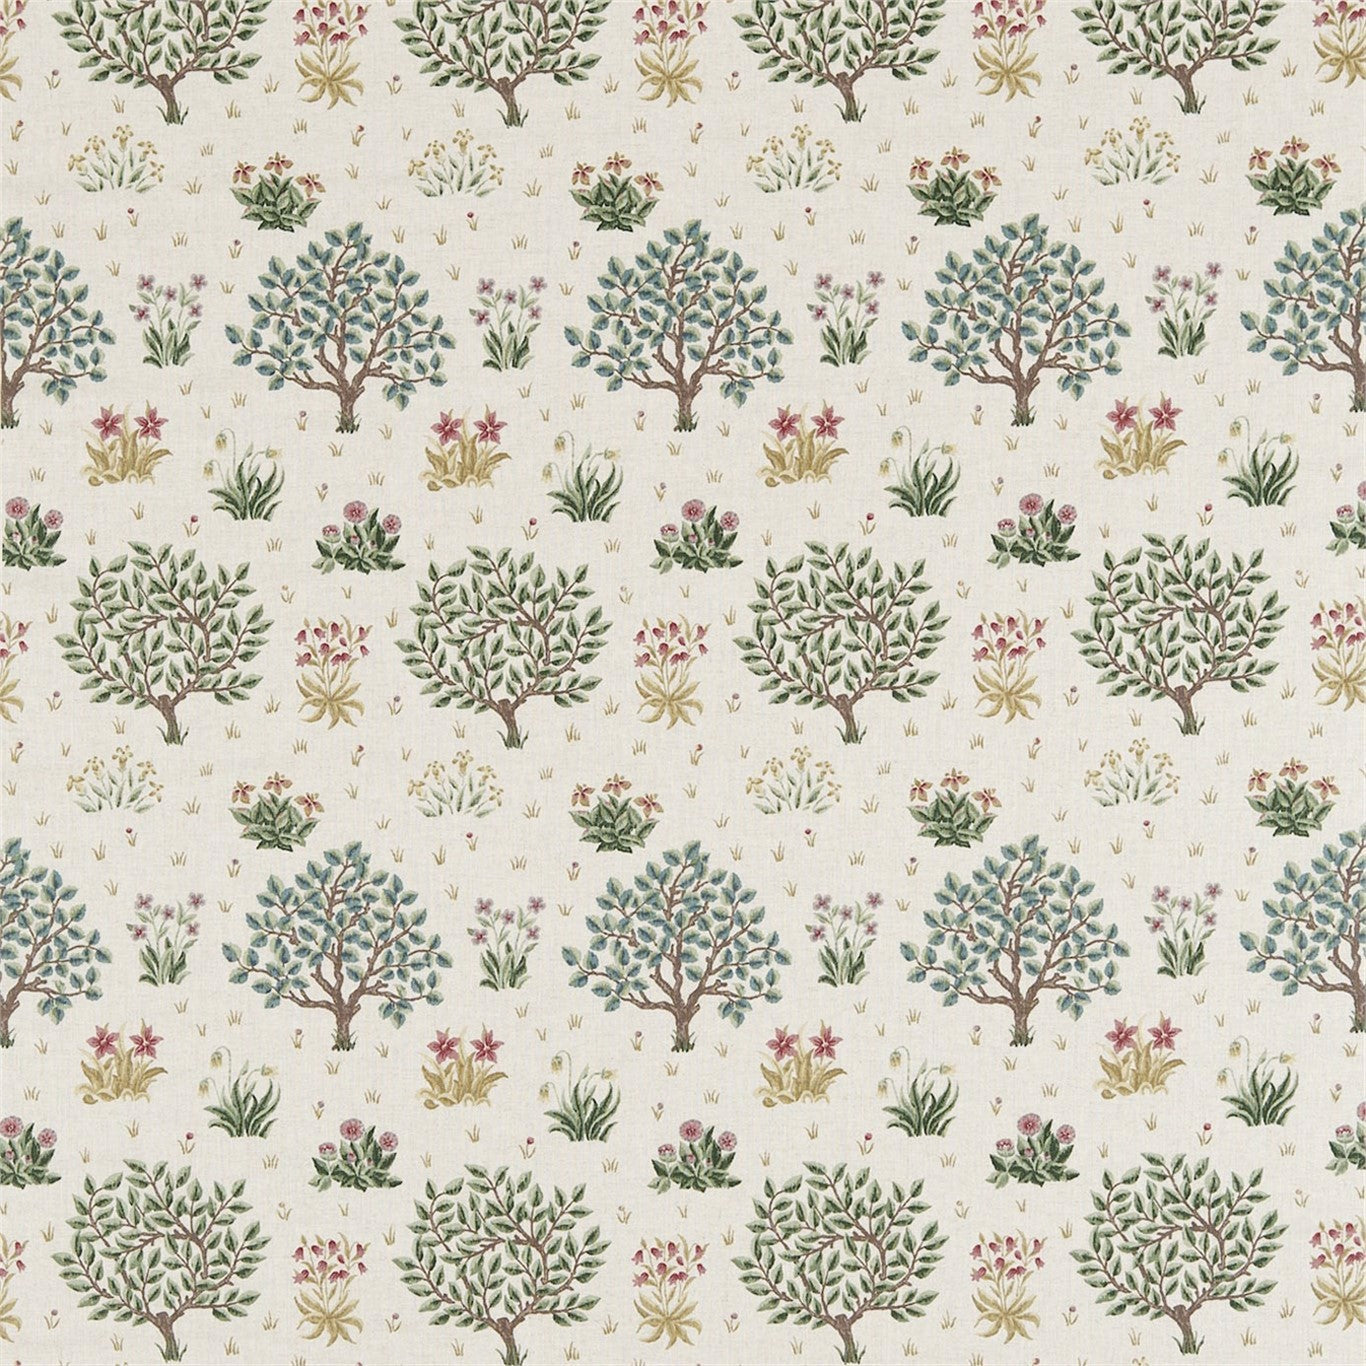 Orchard Fabric by Morris & Co.